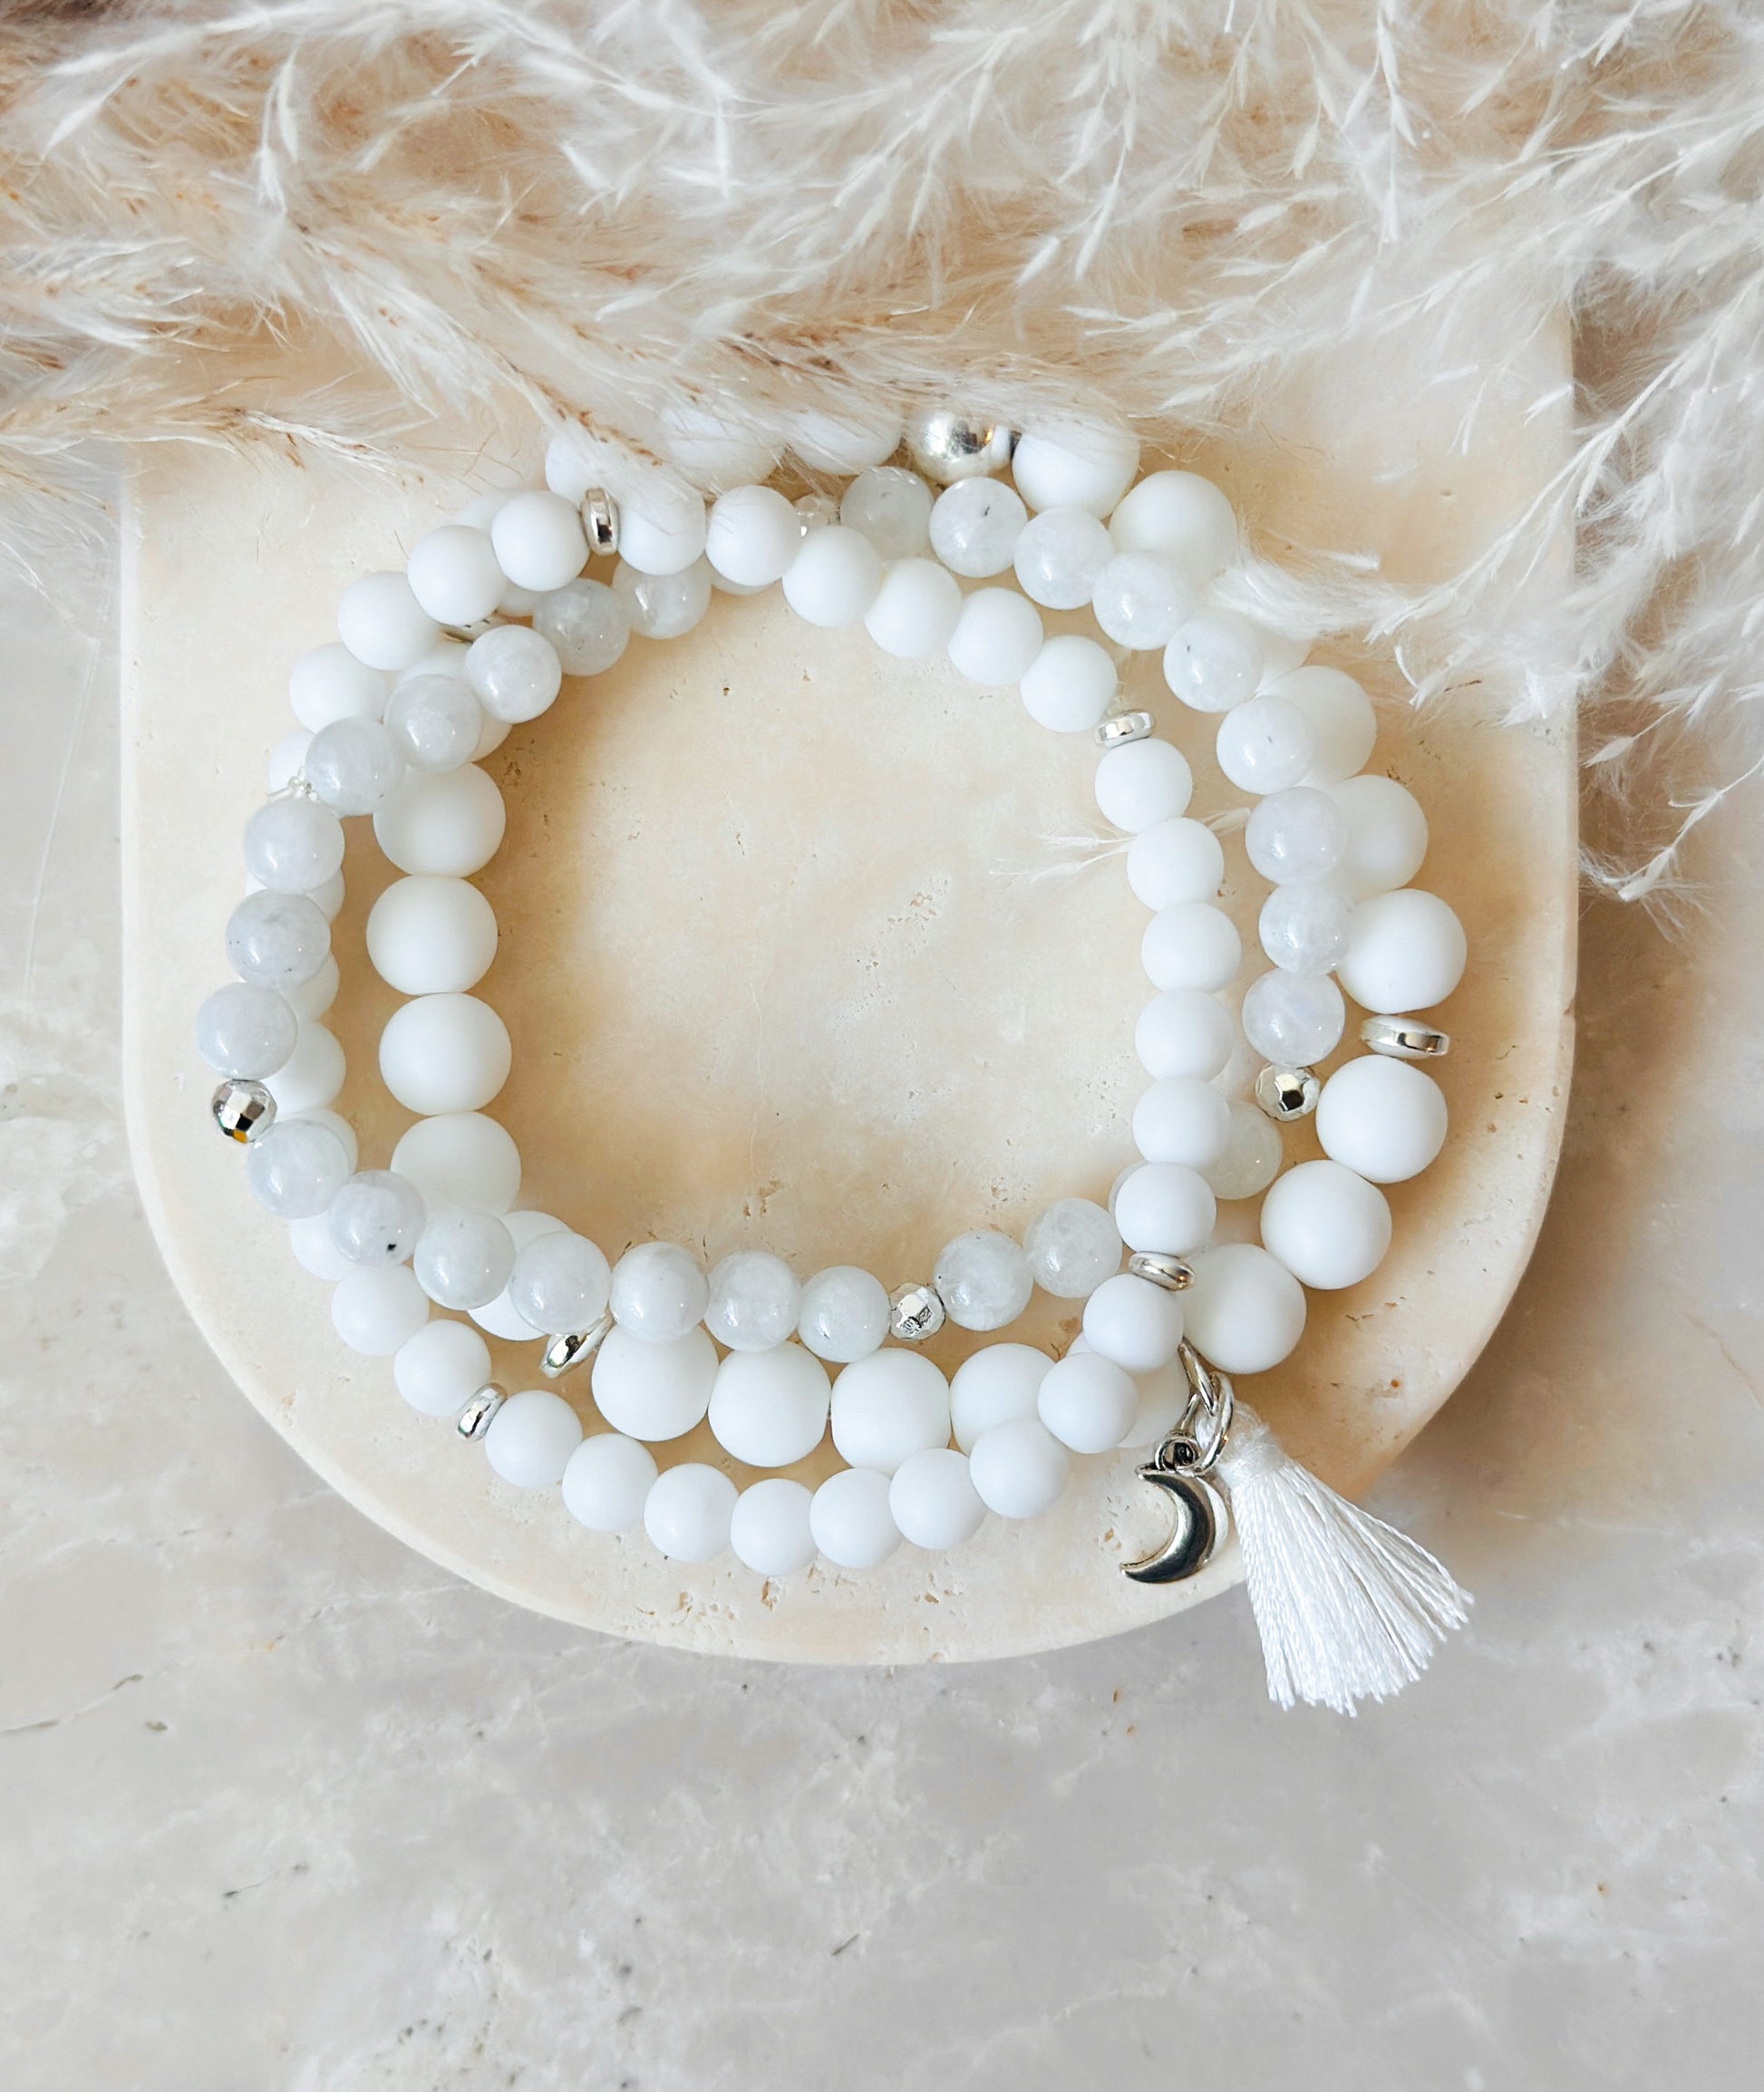 White Agate bracelet set, thoughtfully crafted with White Agate and Moonstone gemstones.